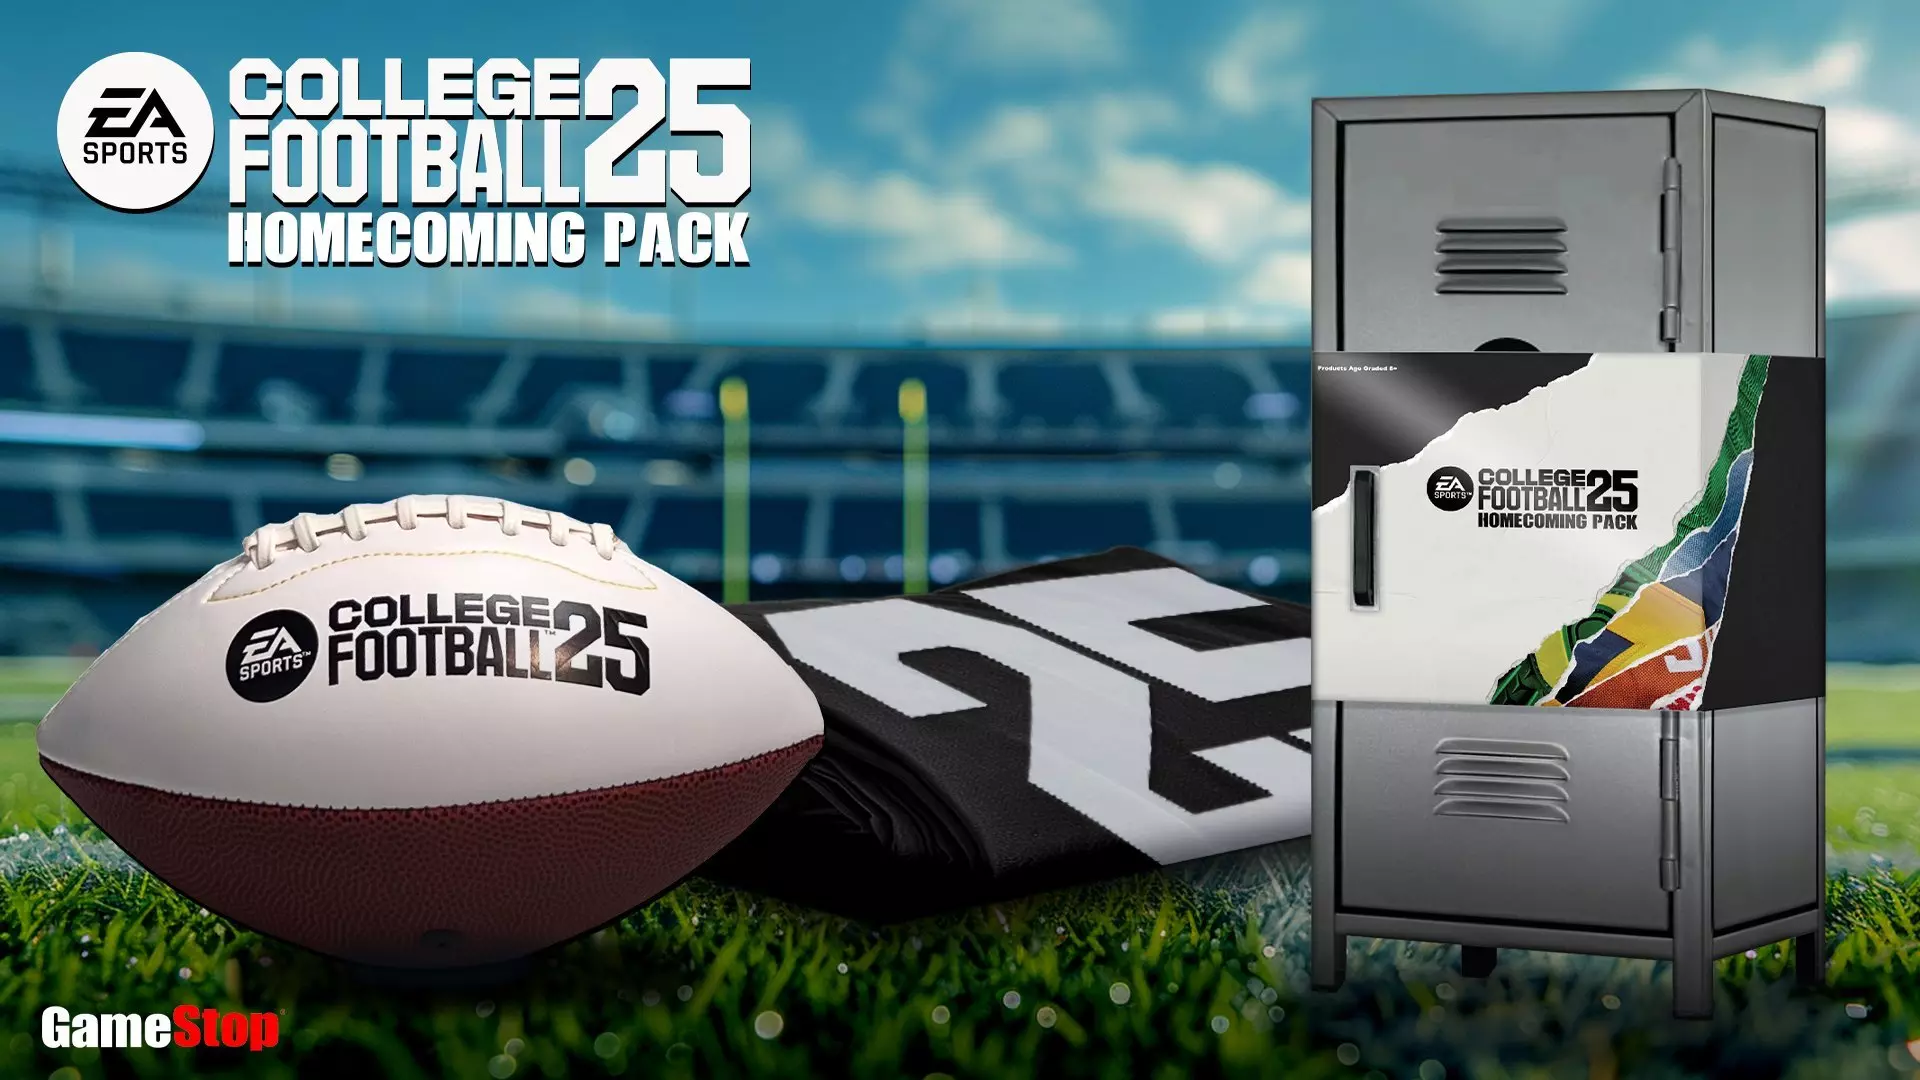 Gear up for game day with the College Football 25 Homecoming Pack